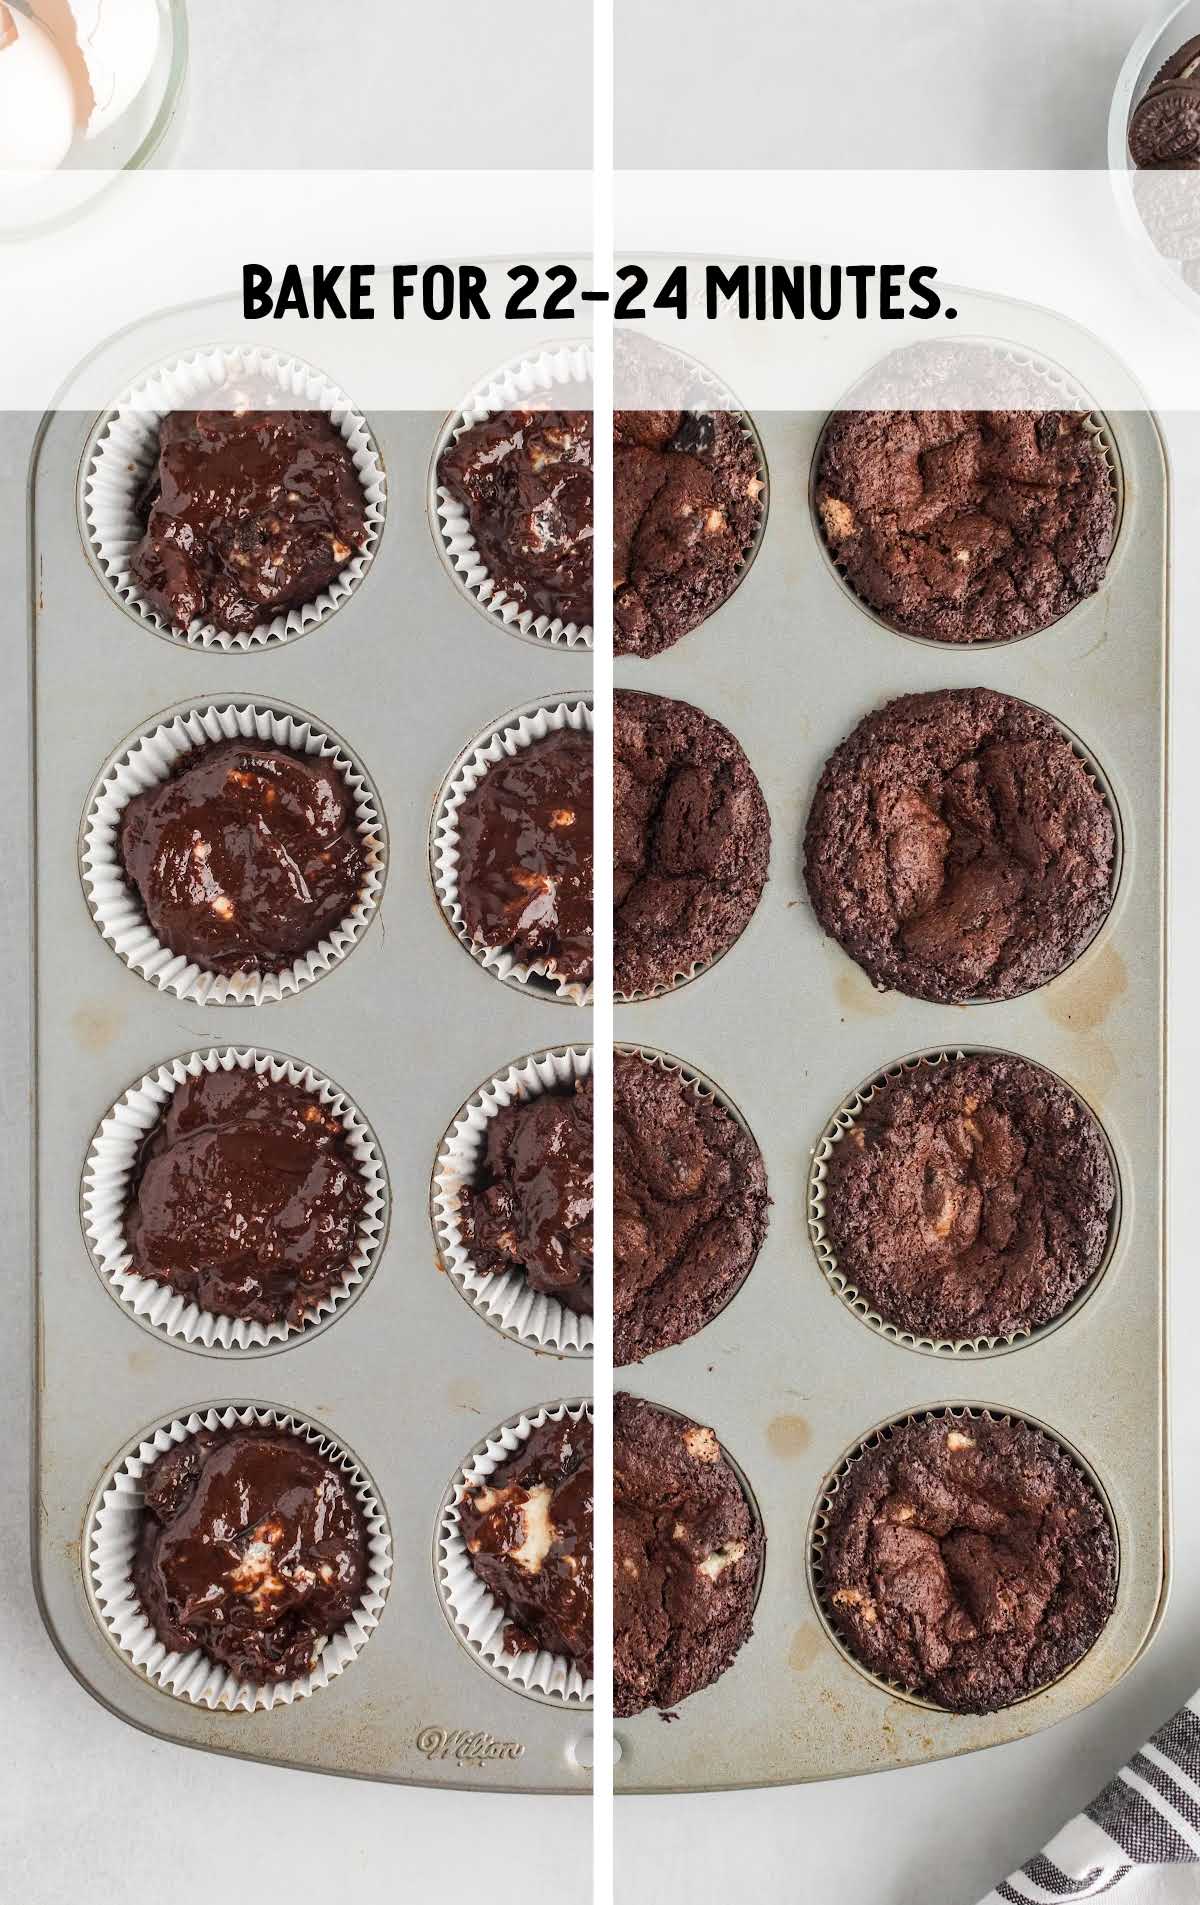 cupcakes baked for 22 to 24 minutes